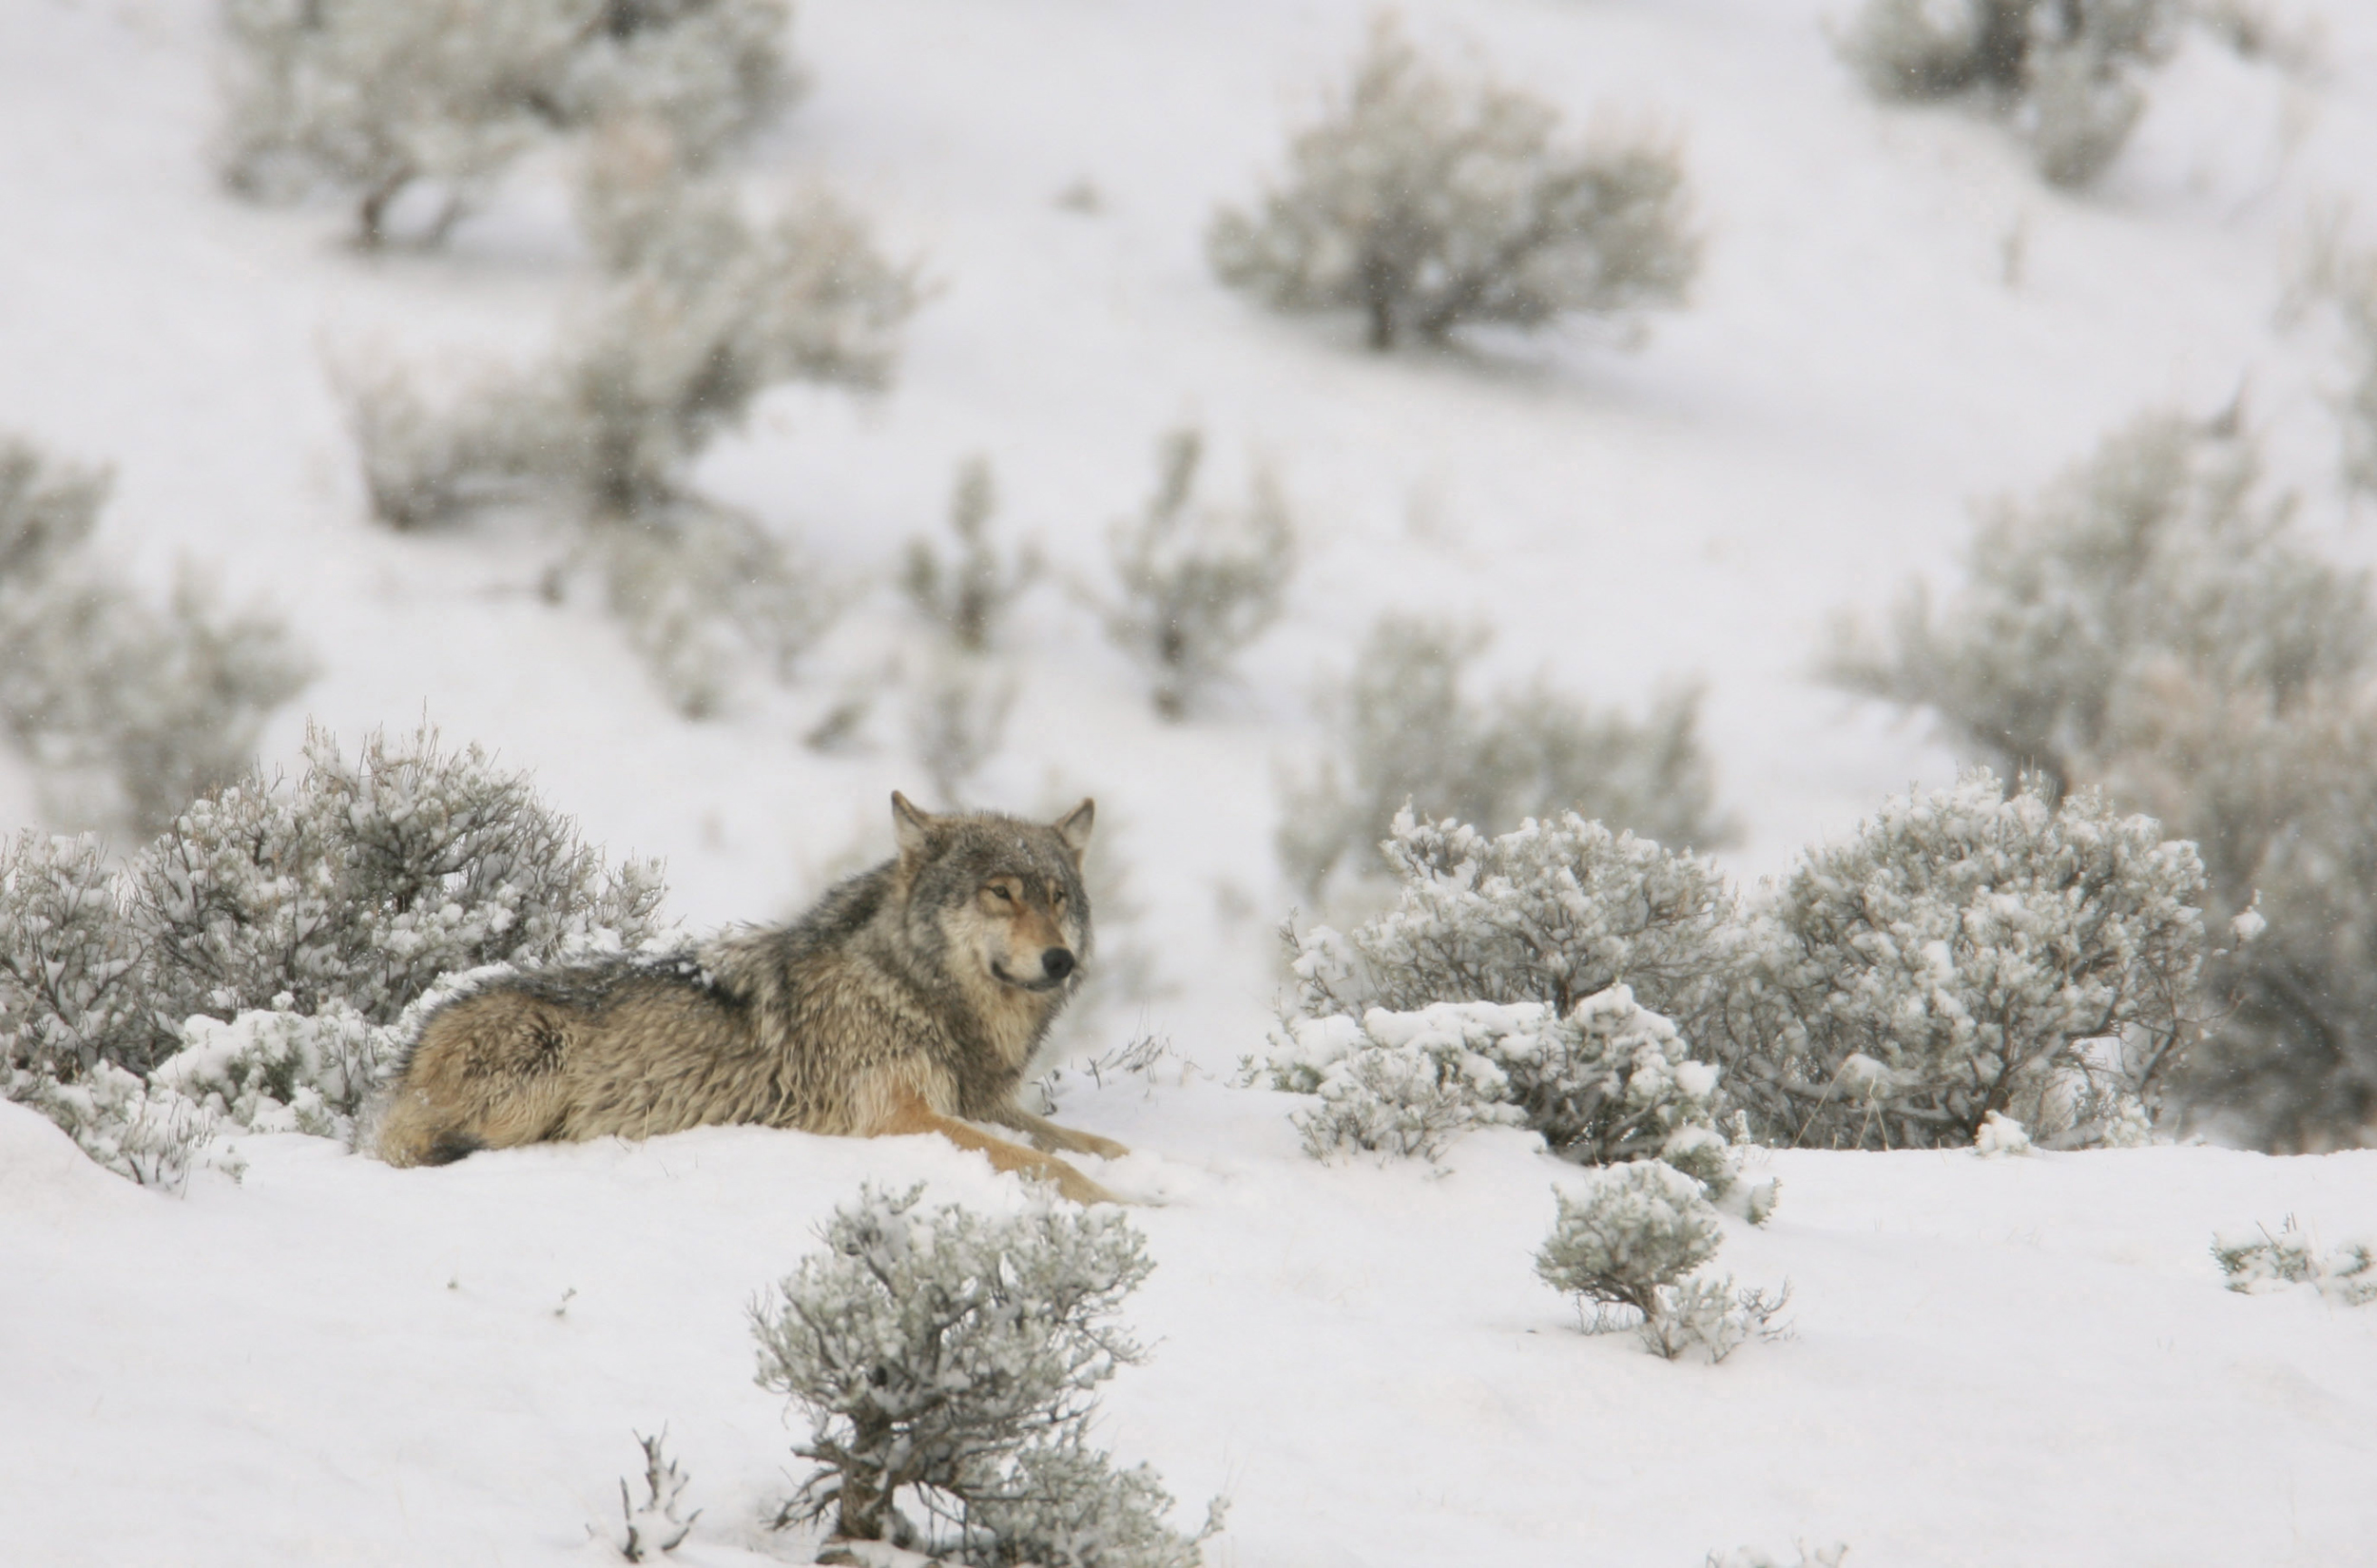 A gray wolf of the Canyon Pack is seen near Mammoth Hot Springs in Yellowstone National Park. Credit: Jim Peaco/NPS